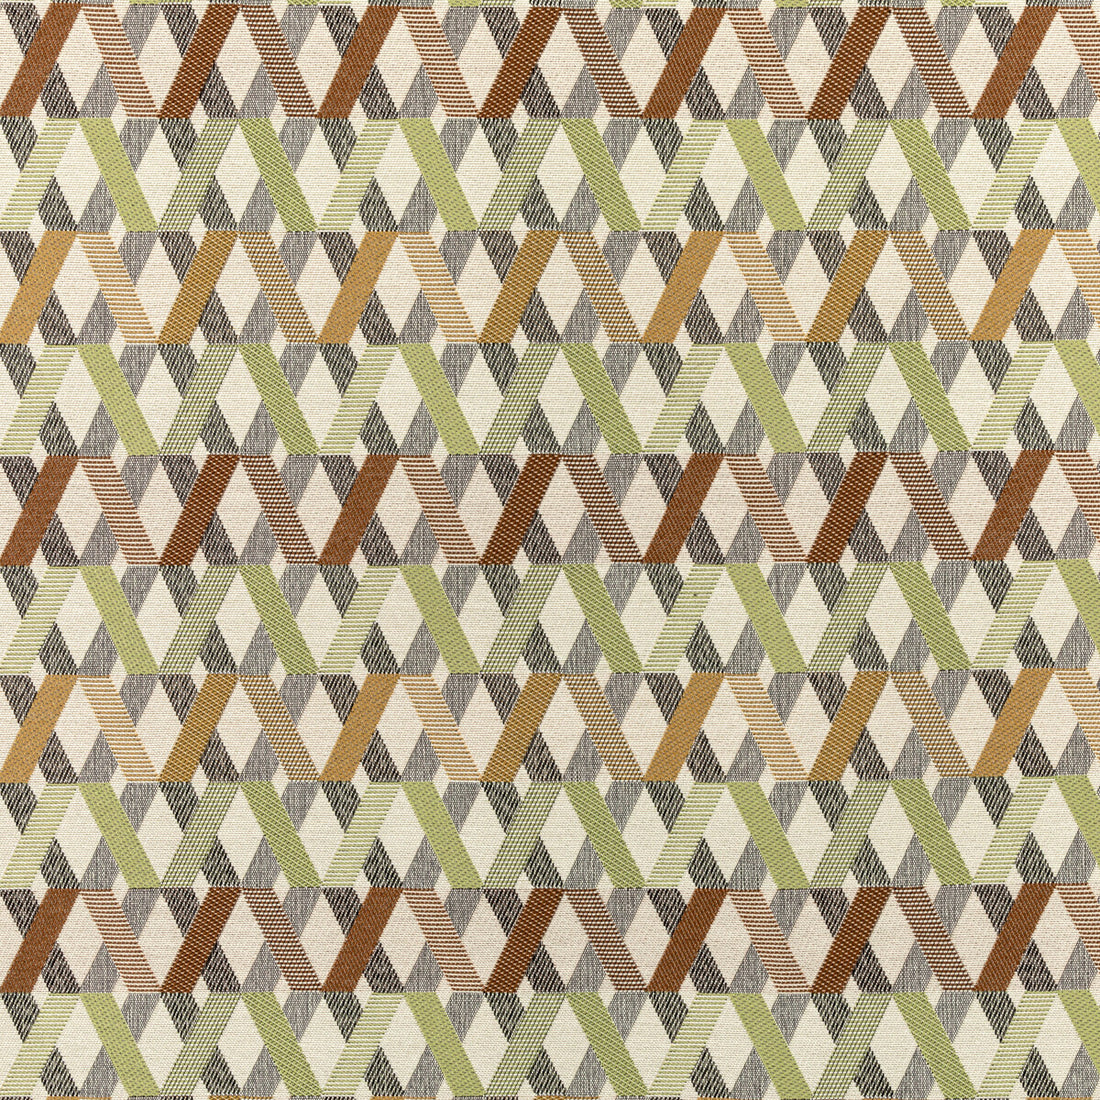 Bridgework fabric in nomad color - pattern 36276.630.0 - by Kravet Contract in the Gis Crypton collection